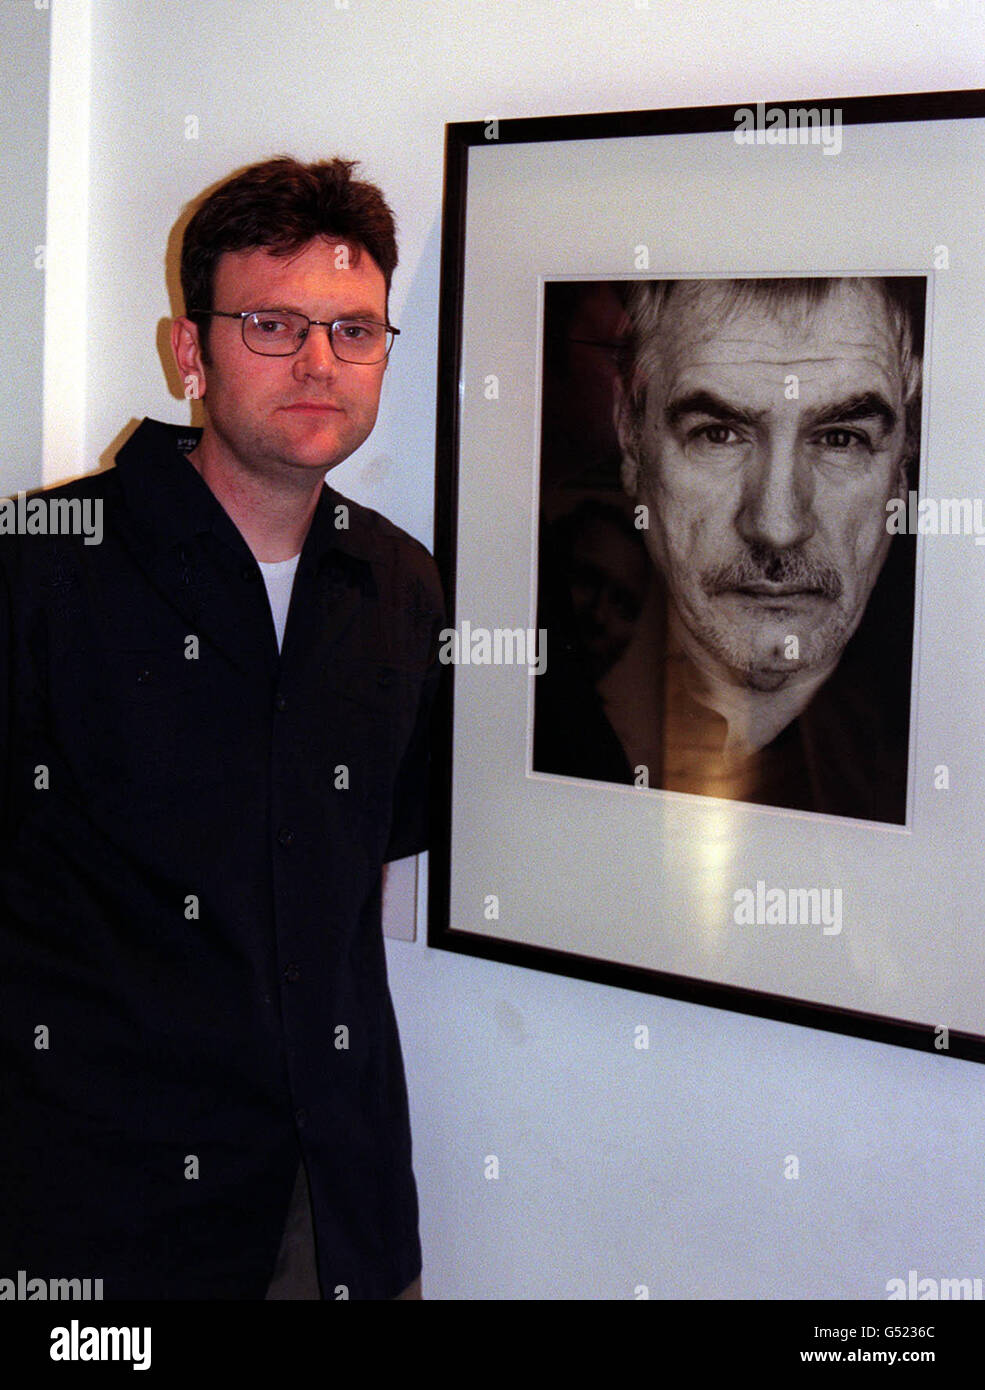 Photographer Donald Maclellan in front of his portrait of actor Brian Cox at an exhibition of his photography at the National Portrait Gallery in London. * The new exhibition of 22 photographic portraits by MacLellan celebrates the growing prominance of Scottish actors in contemporary cinema. Included in the exhibition, opened by TV presenter Gail Porter are Ewan MacGregor, Kelly MacDonald and Robert Carlyle who rose to fame in Danny Boyle's 'Trainspotting'. PA photo: Maev Allen. Stock Photo